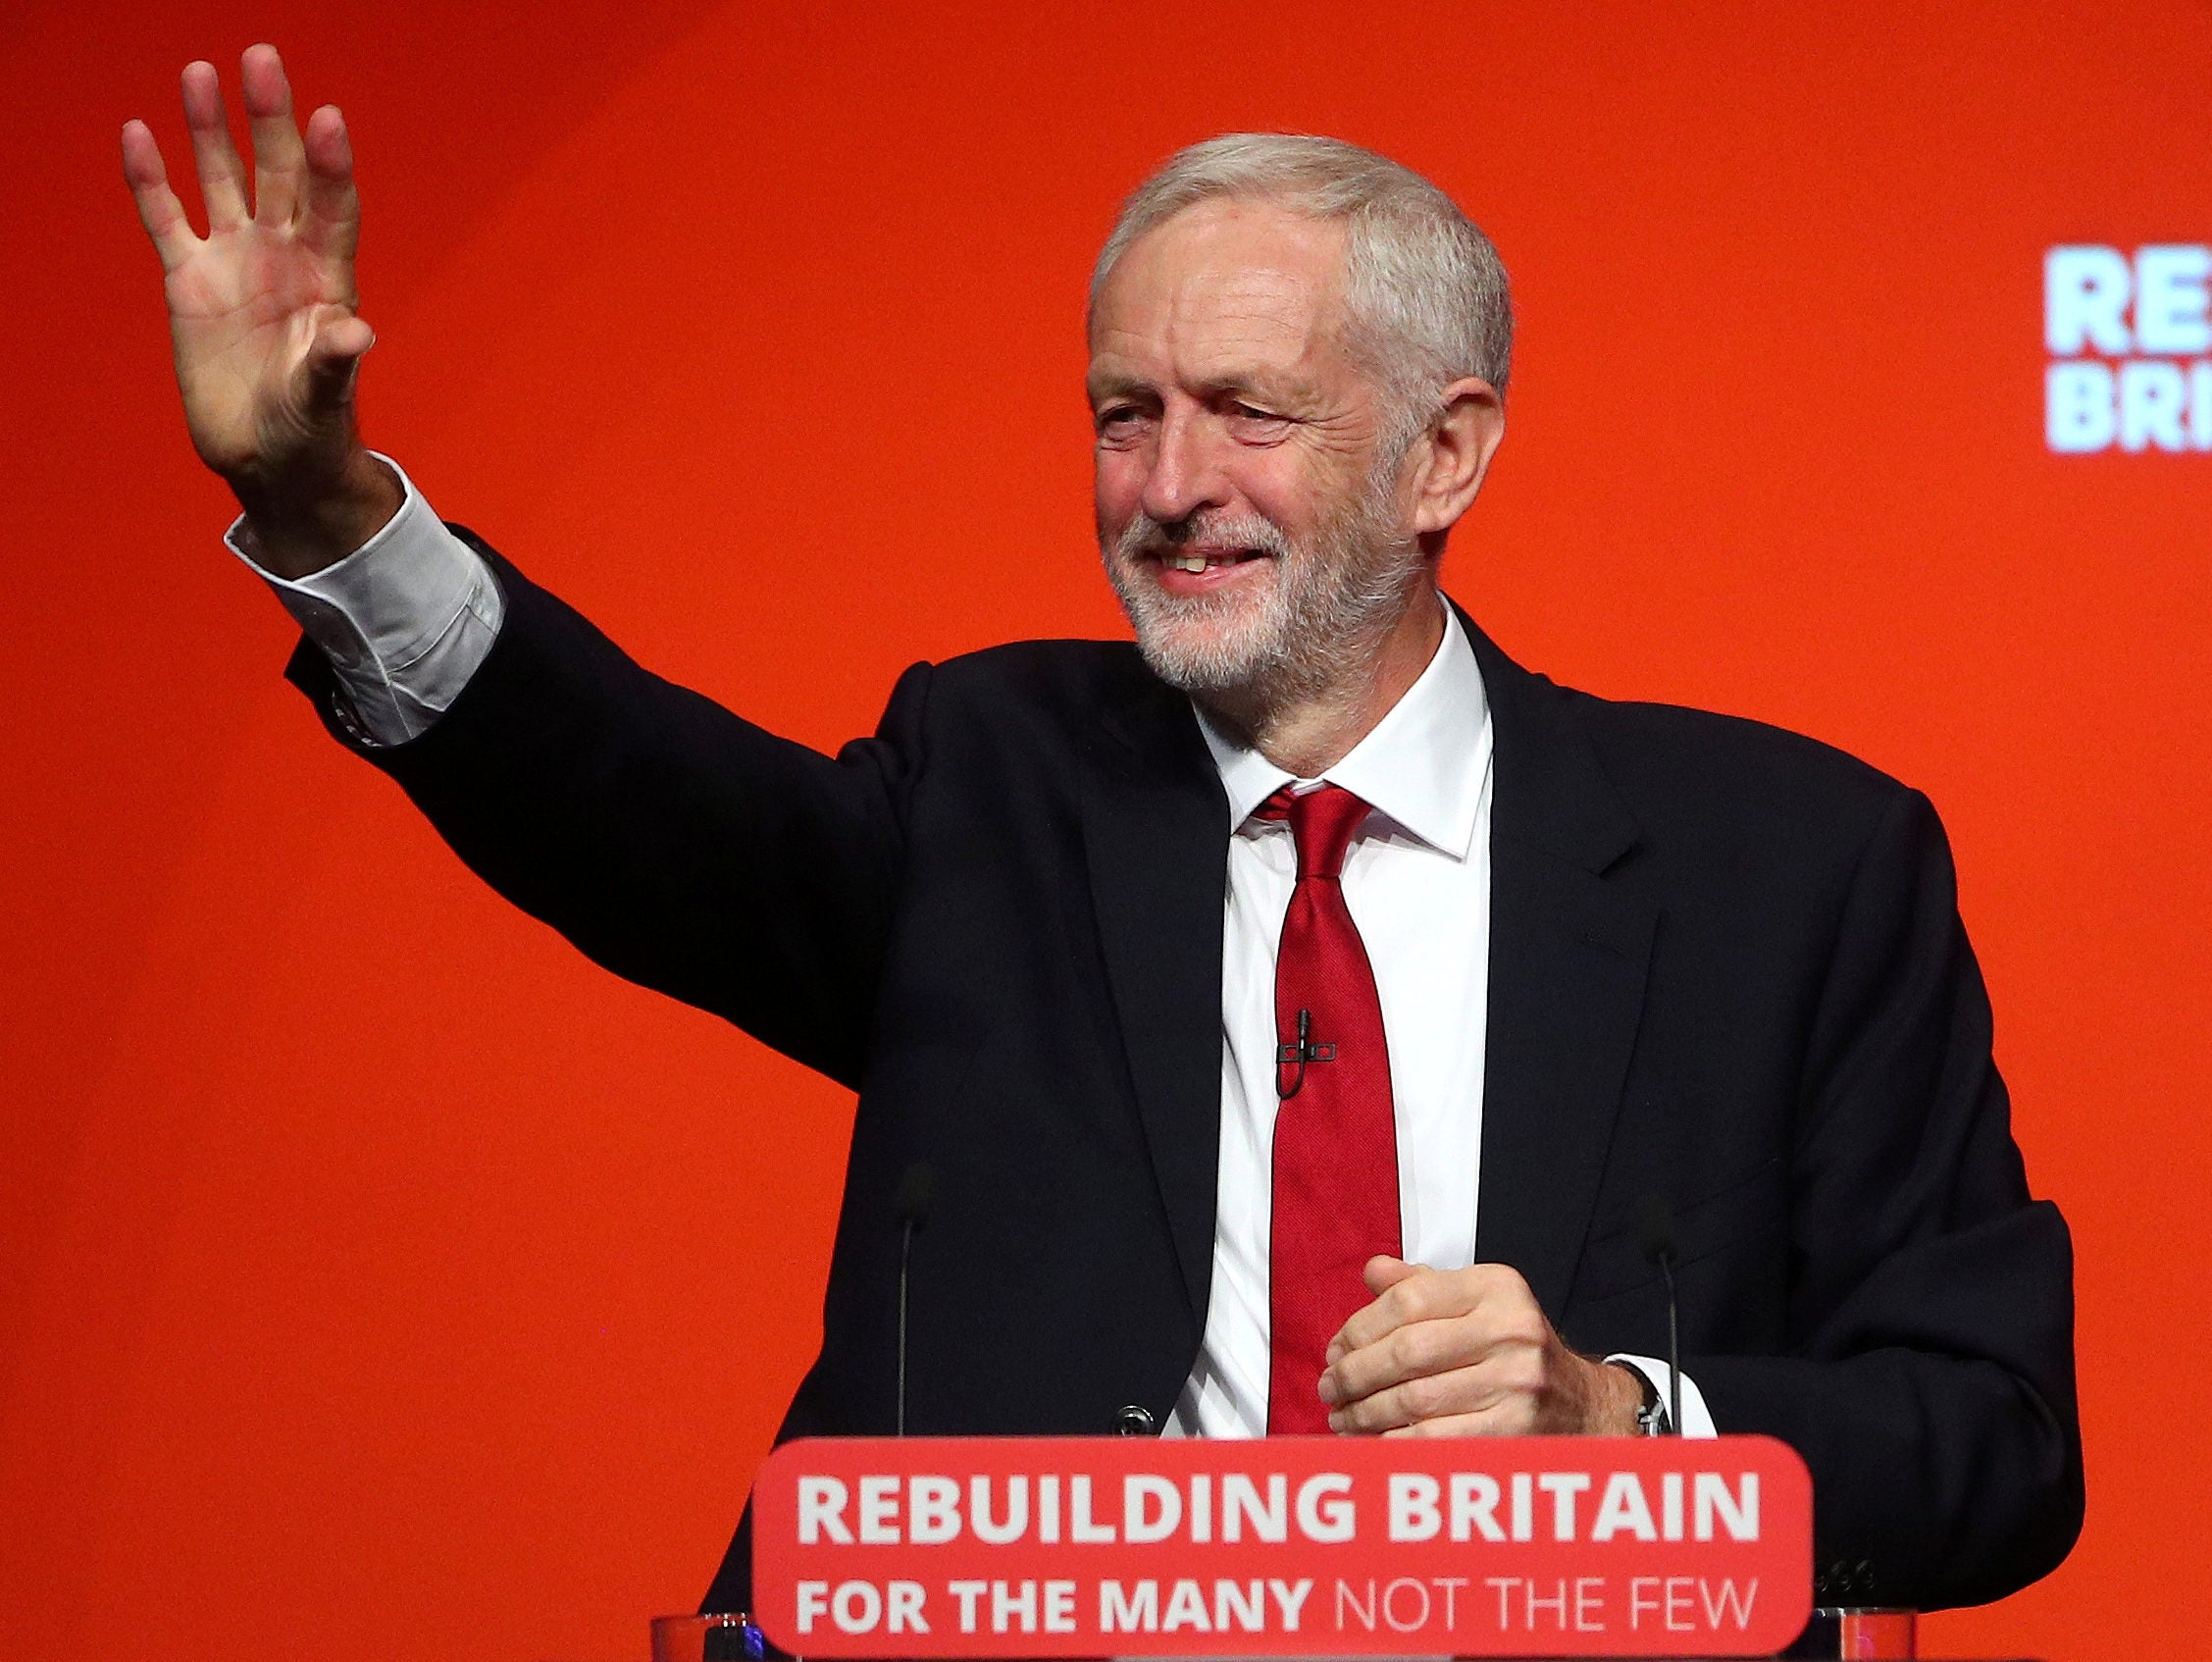 Jeremy Corbyn tells Labour Conference free press in UK 'has too often meant the freedom to spread lies and half-truths'